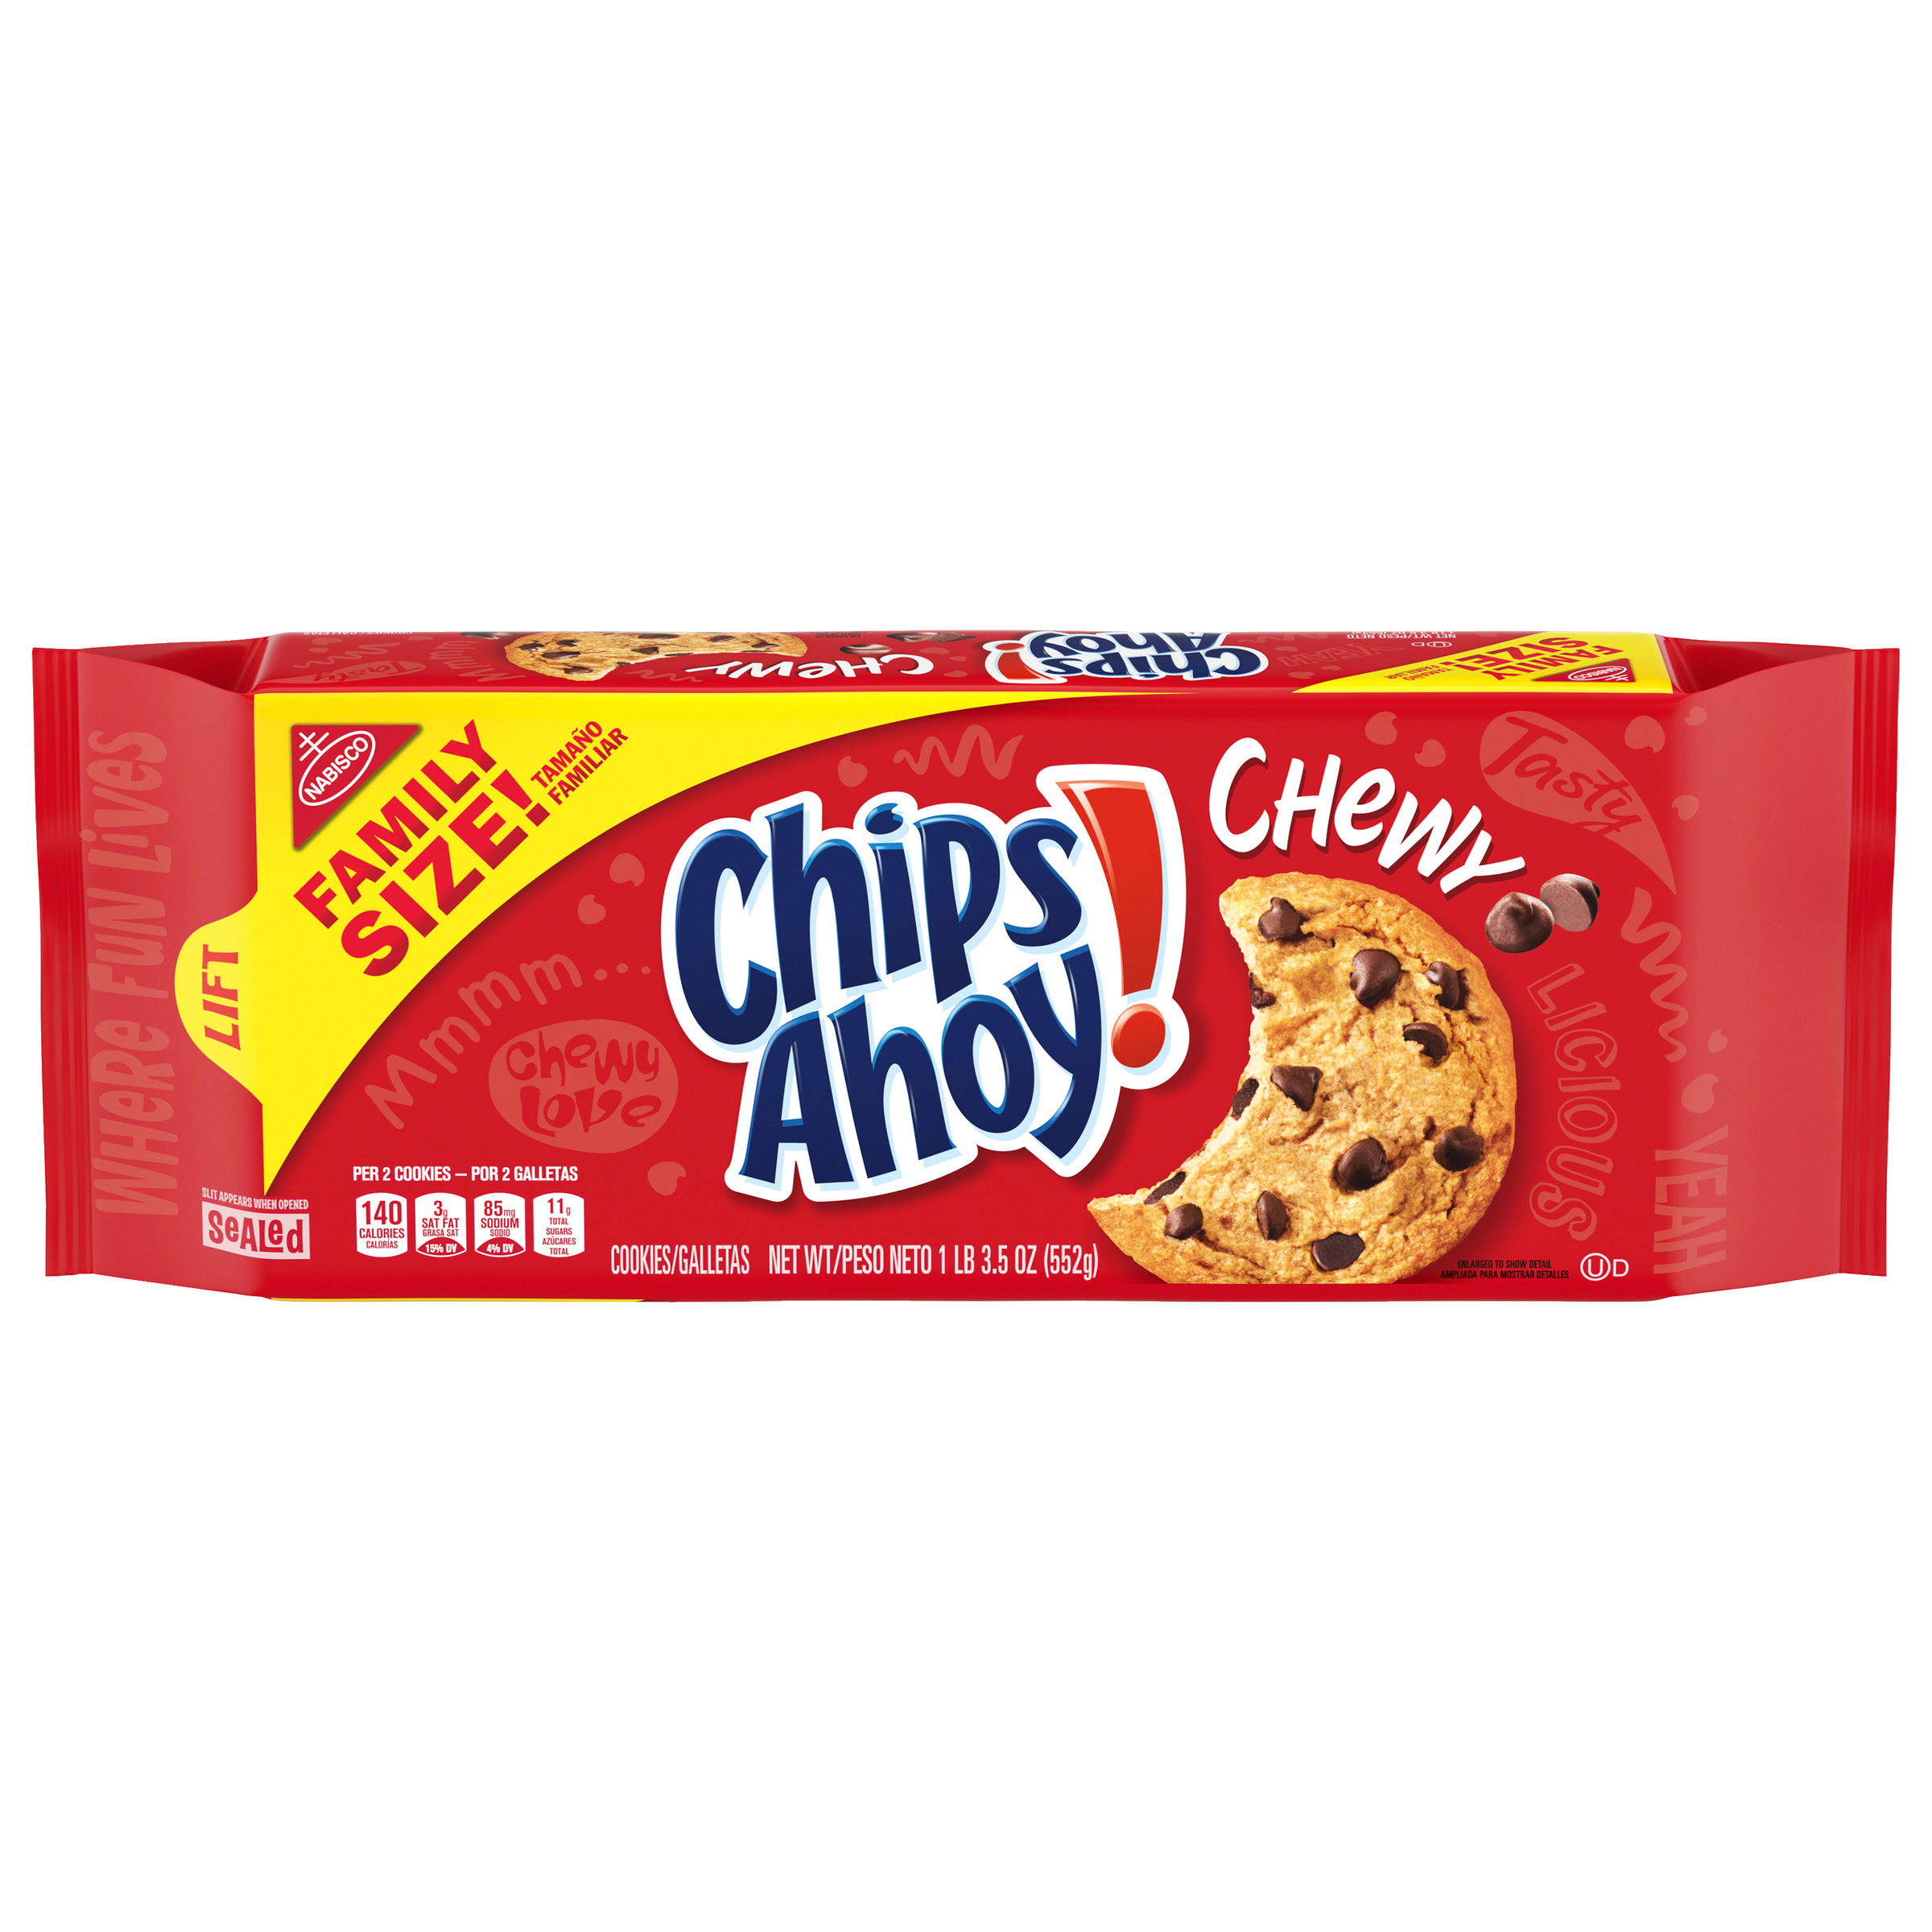 CHIPS AHOY! Chewy Chewy Cookies 19.5 oz